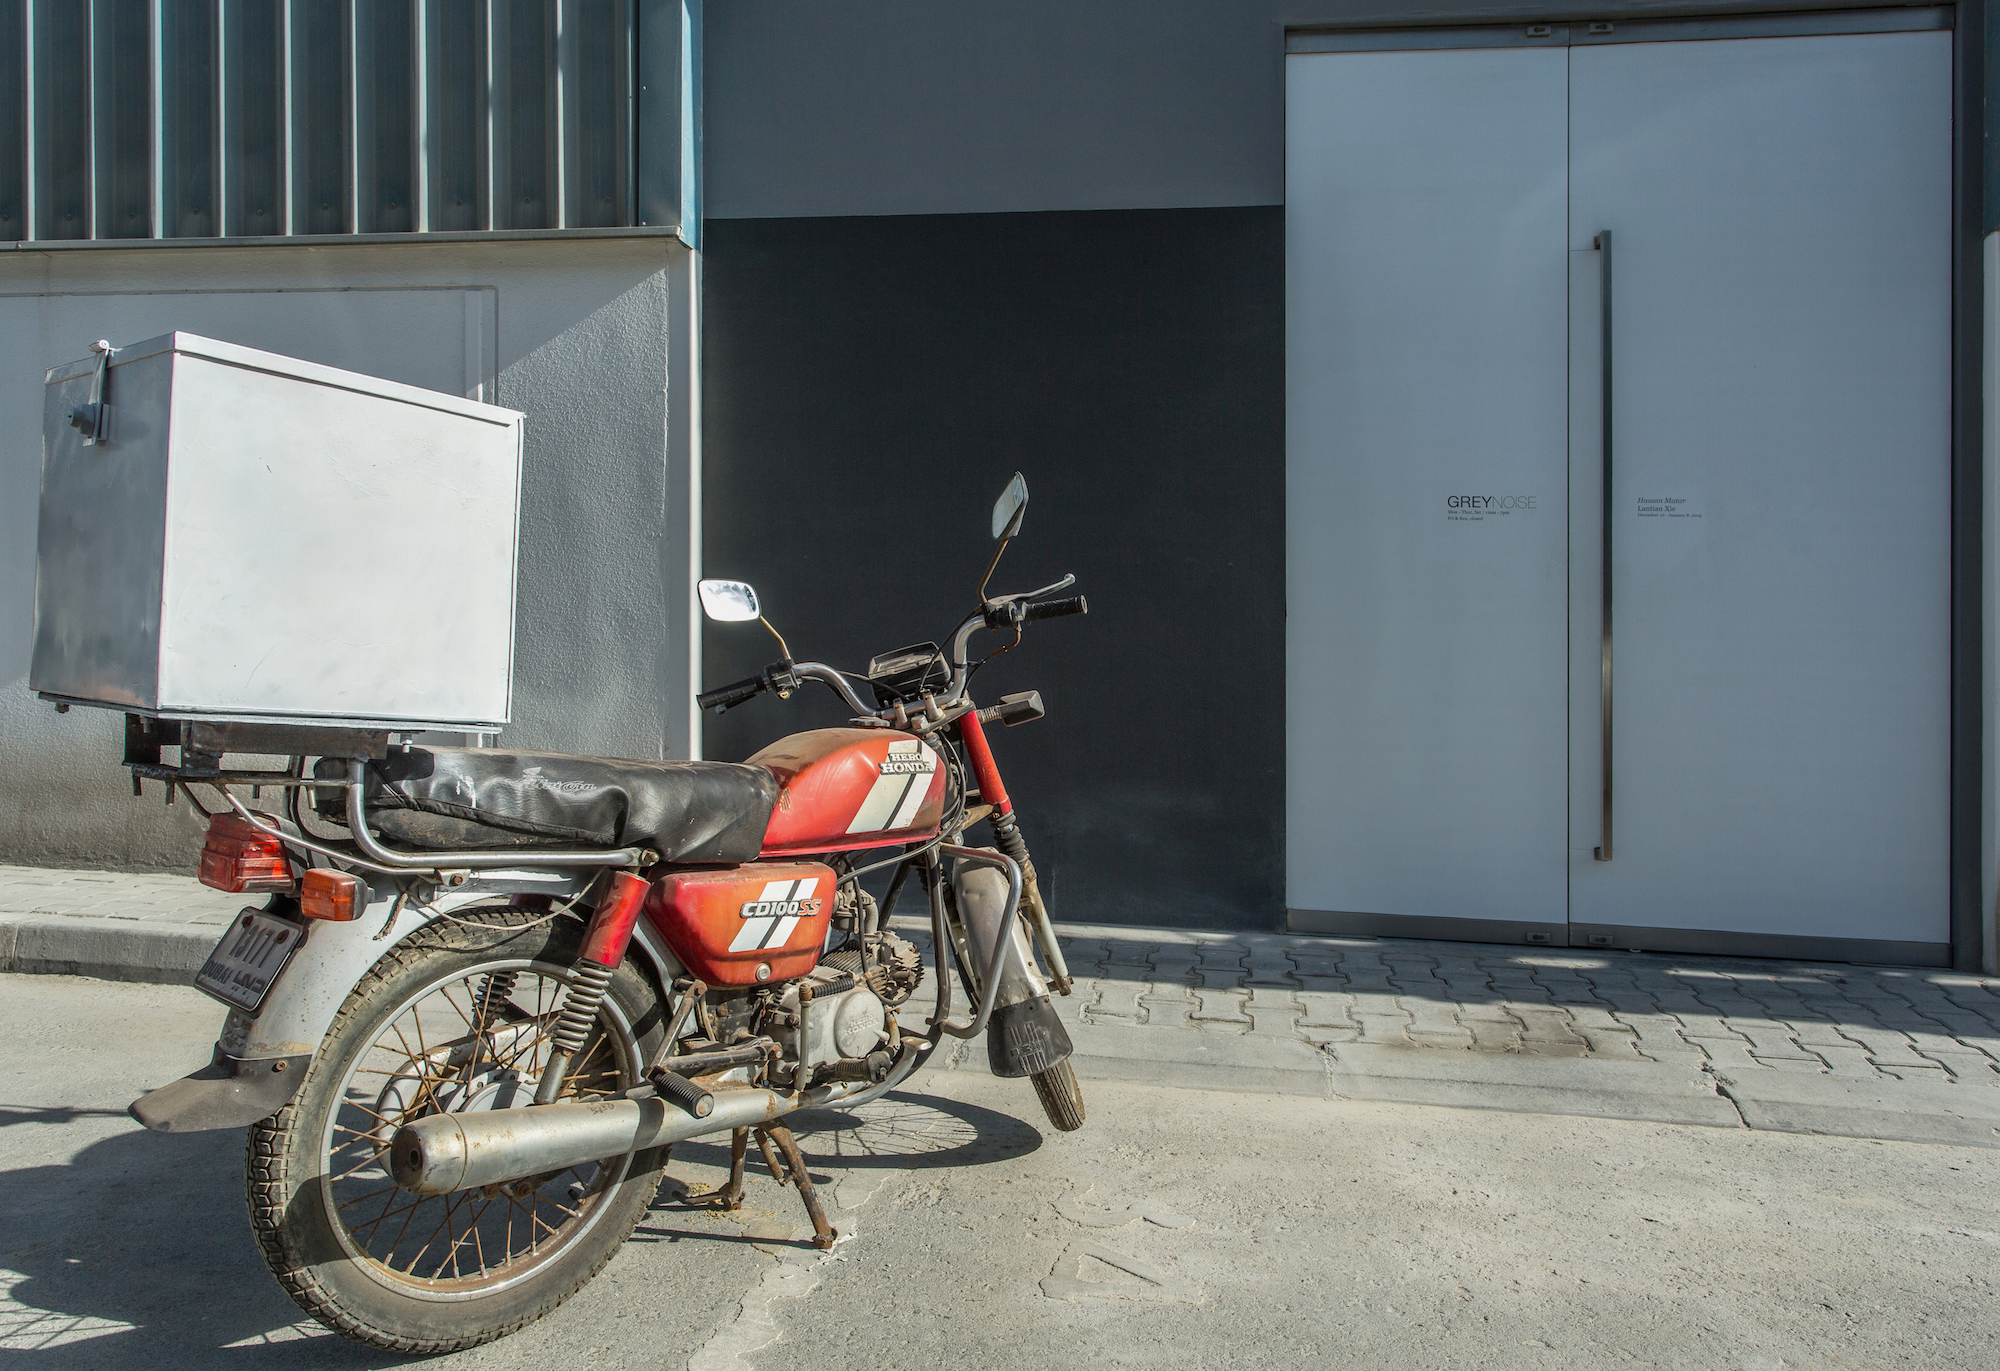  Home-delivery motorcycle parked outside 2014 Variable dimensions 